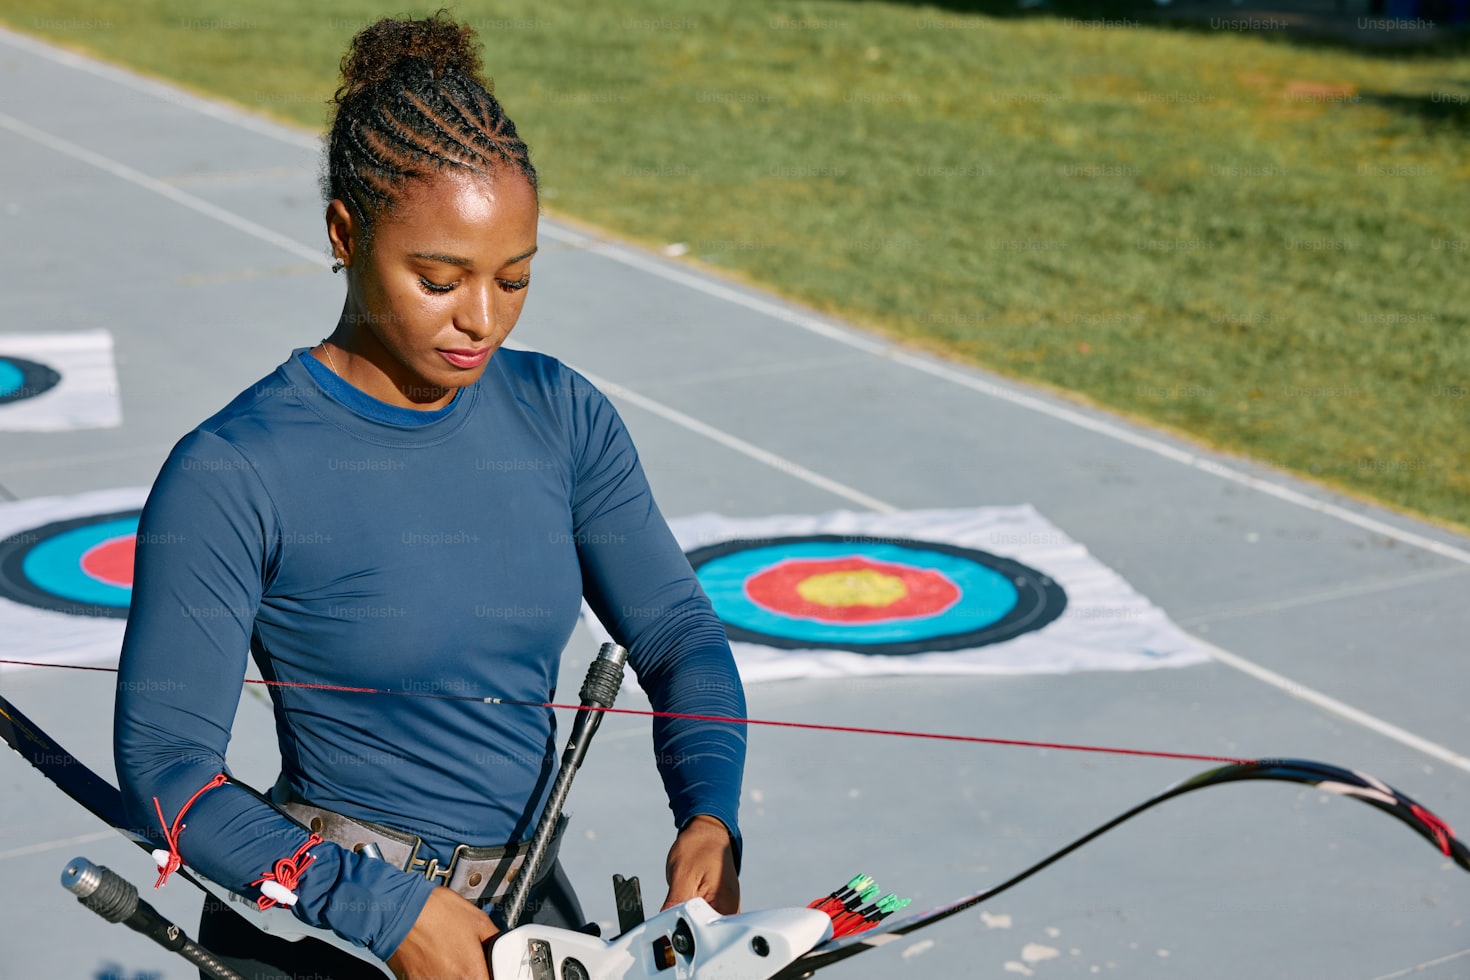 A person getting their bow ready for archery training